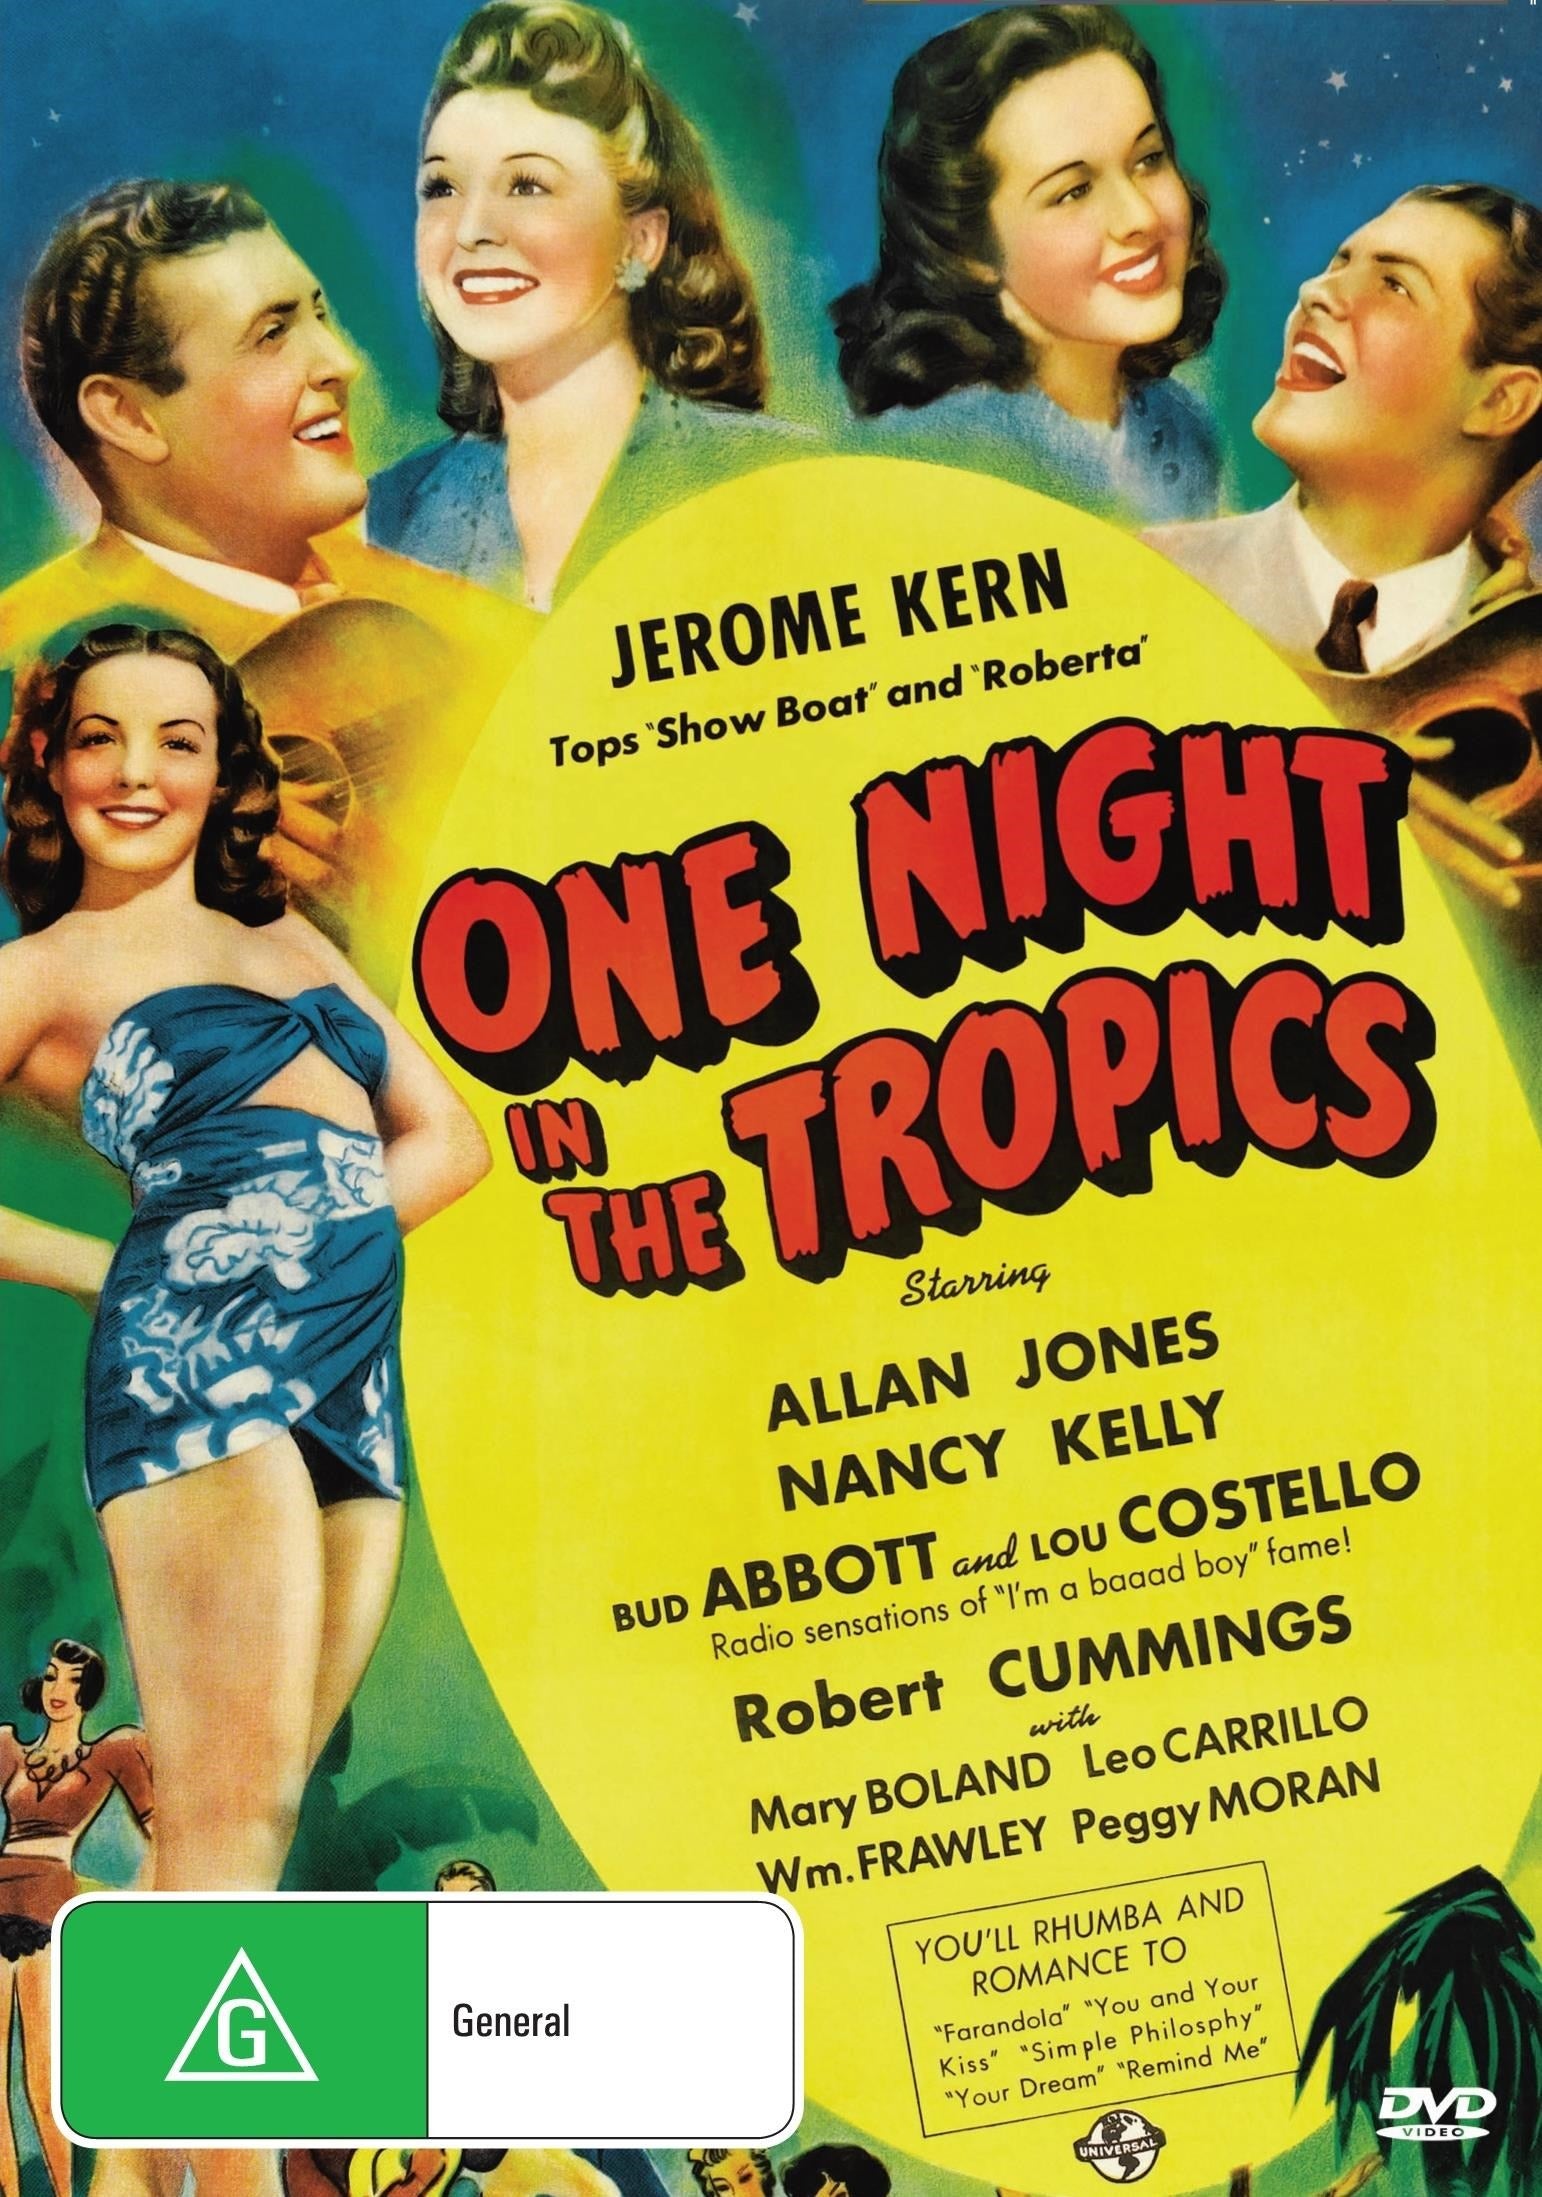 One Night in the Tropics rareandcollectibledvds